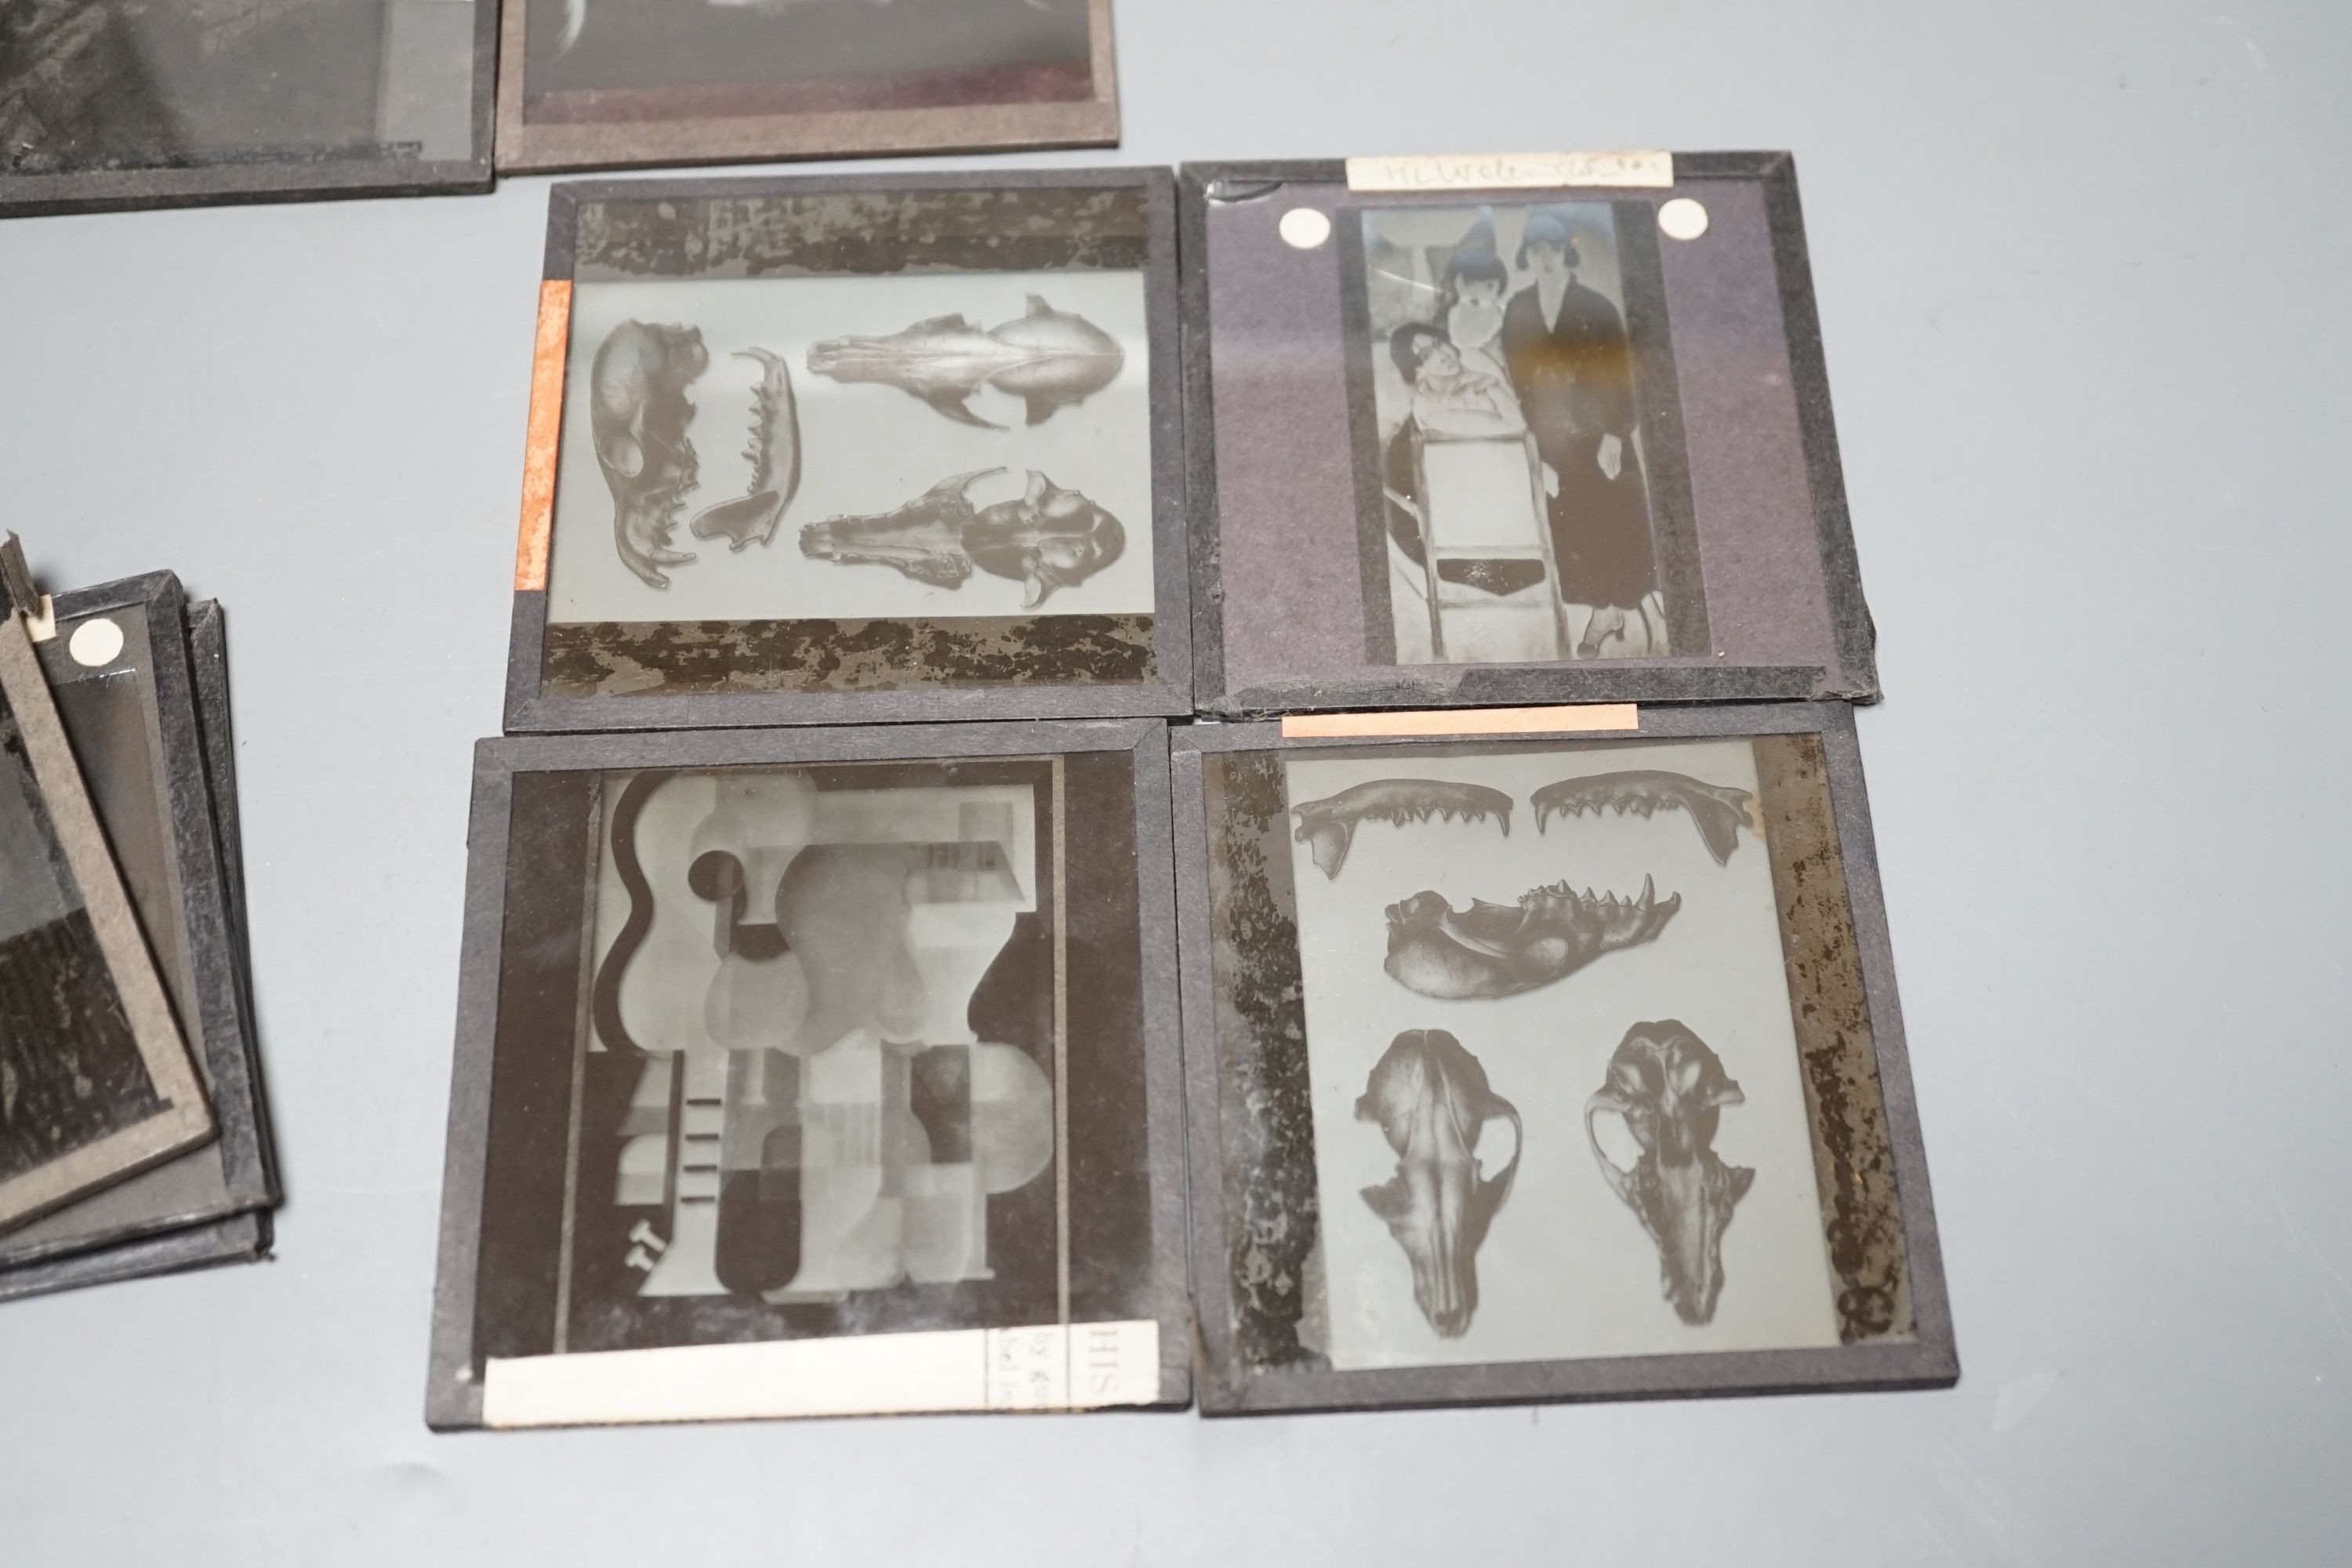 A collection of glass plate photographic slides, famous early 20th century painters etc